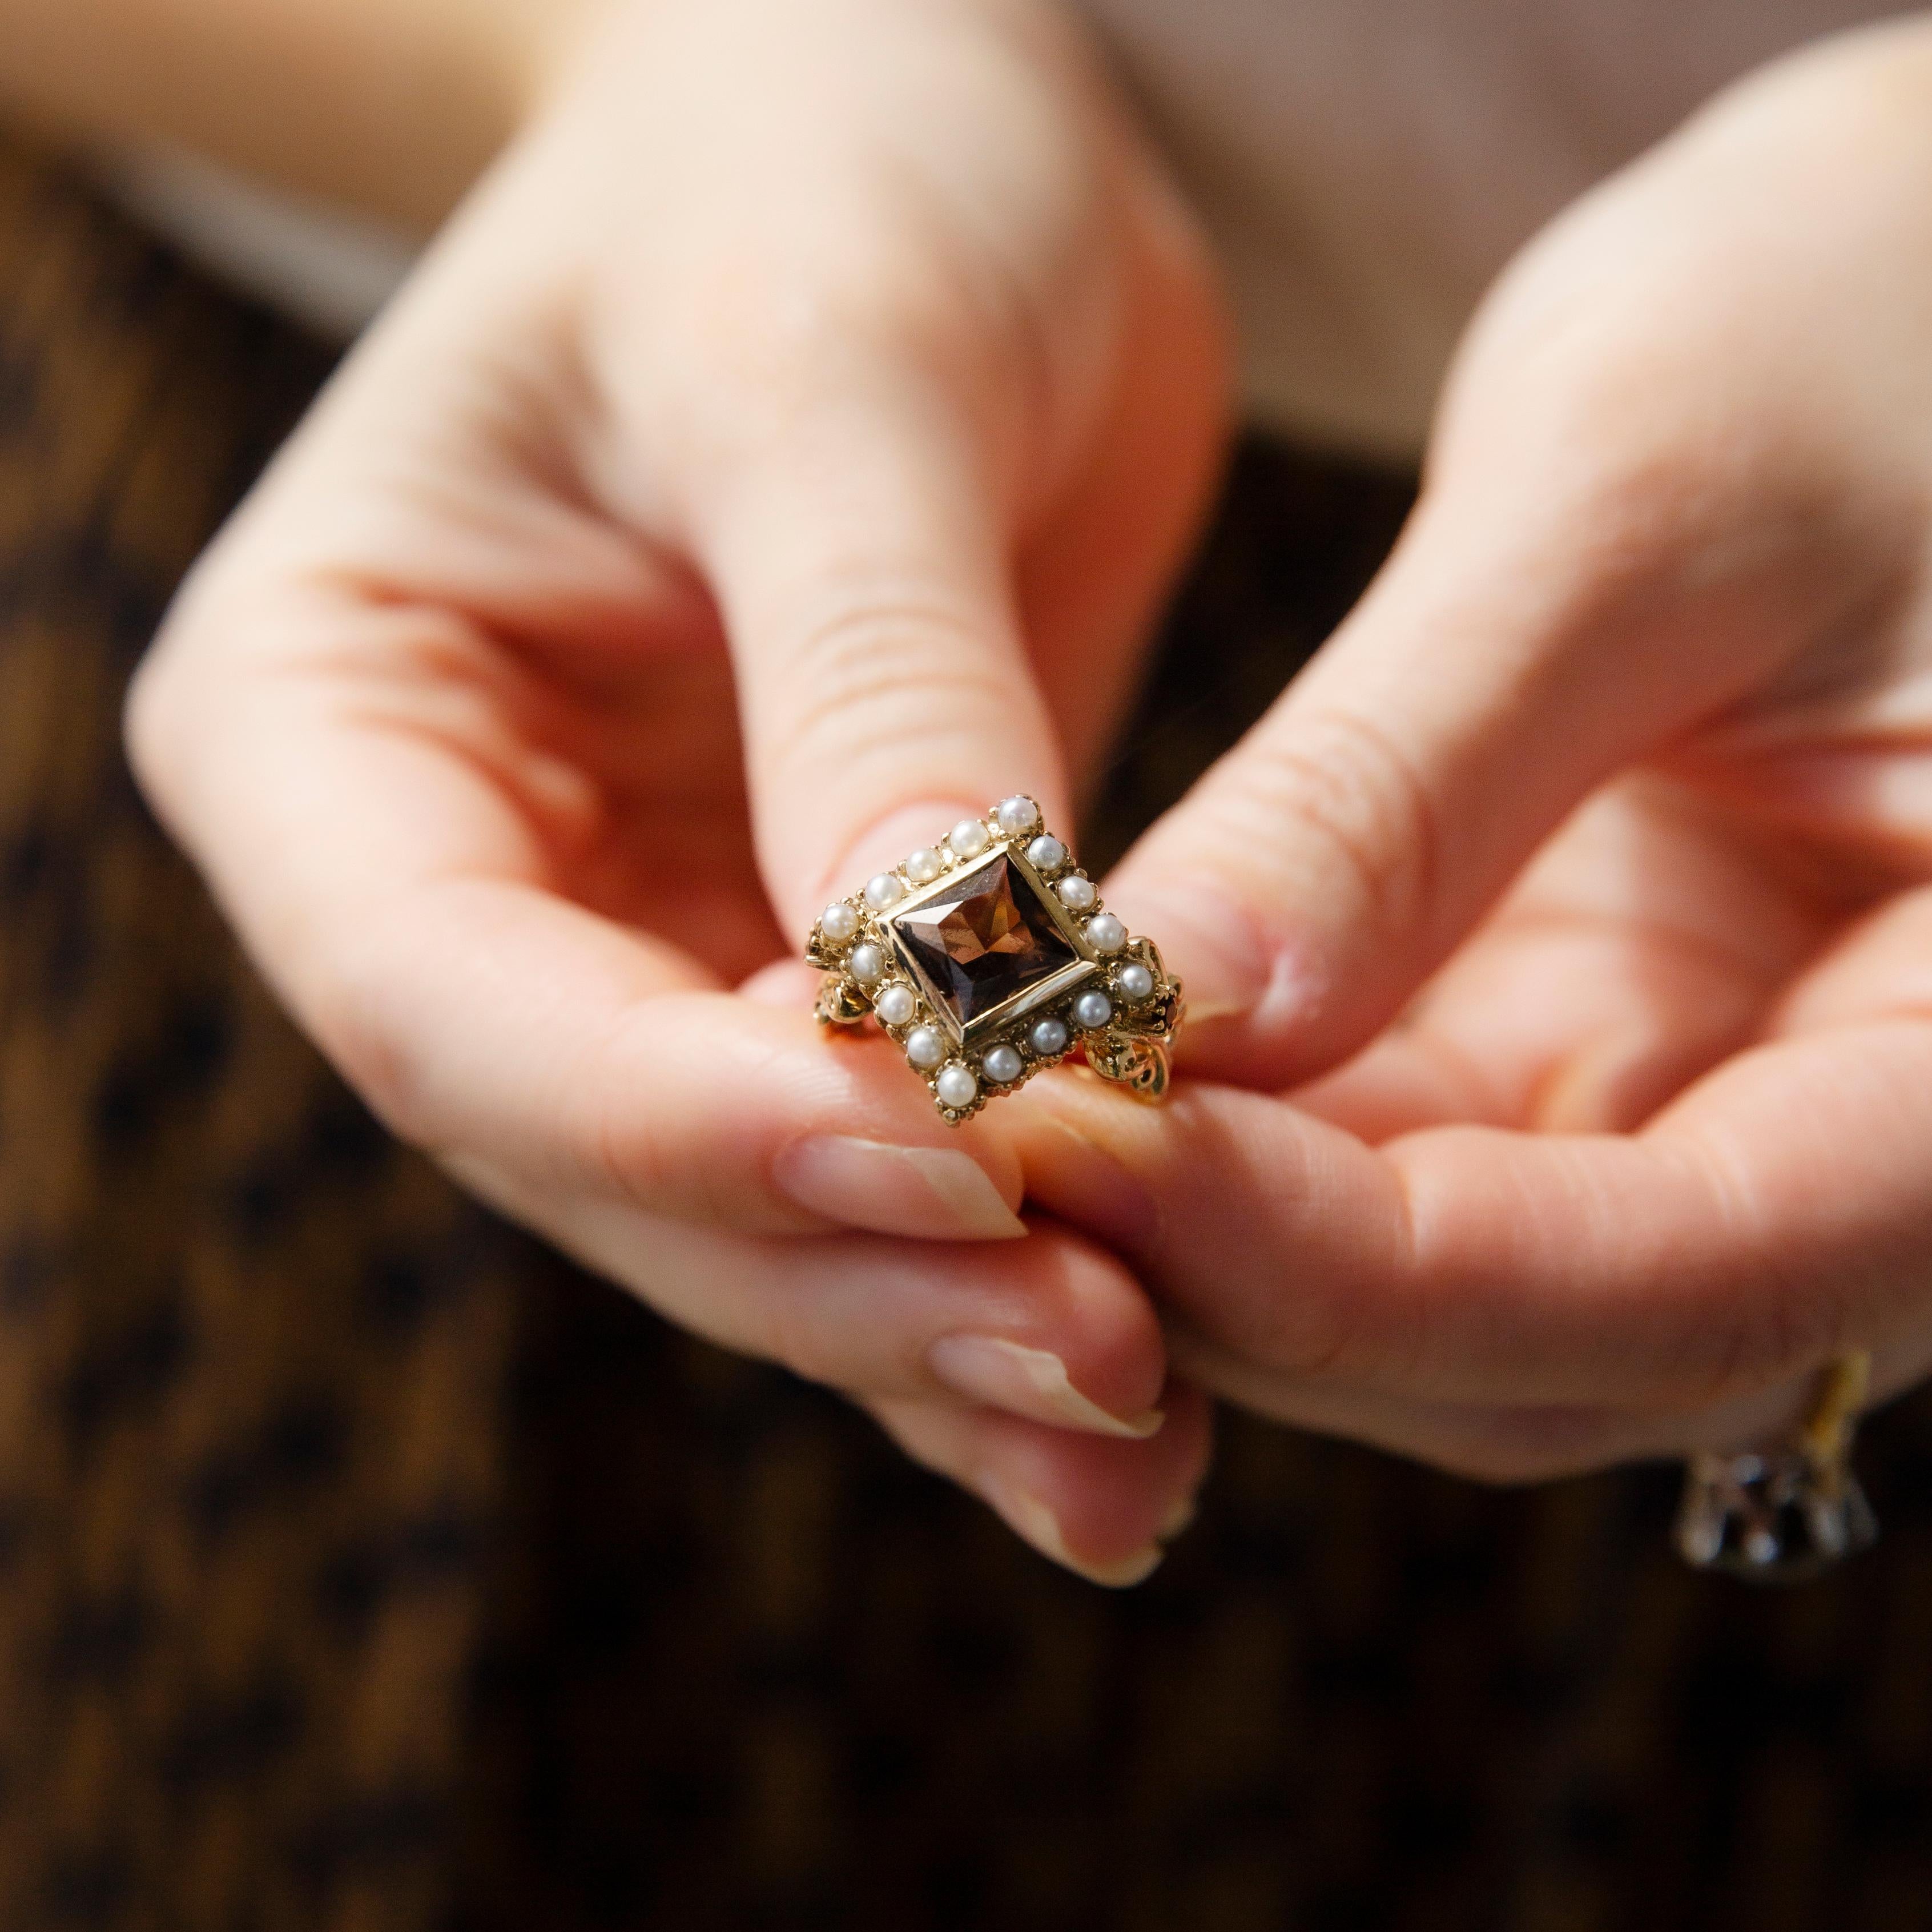 The Nellie Ring, crafted in 9 carat gold, is a charming offset square design that provides it an eccentric twist. Scrolls of ribbon embellished with a single quartz on either side rise to meet a rich bronze smoky quartz framed by lush seed pearls.